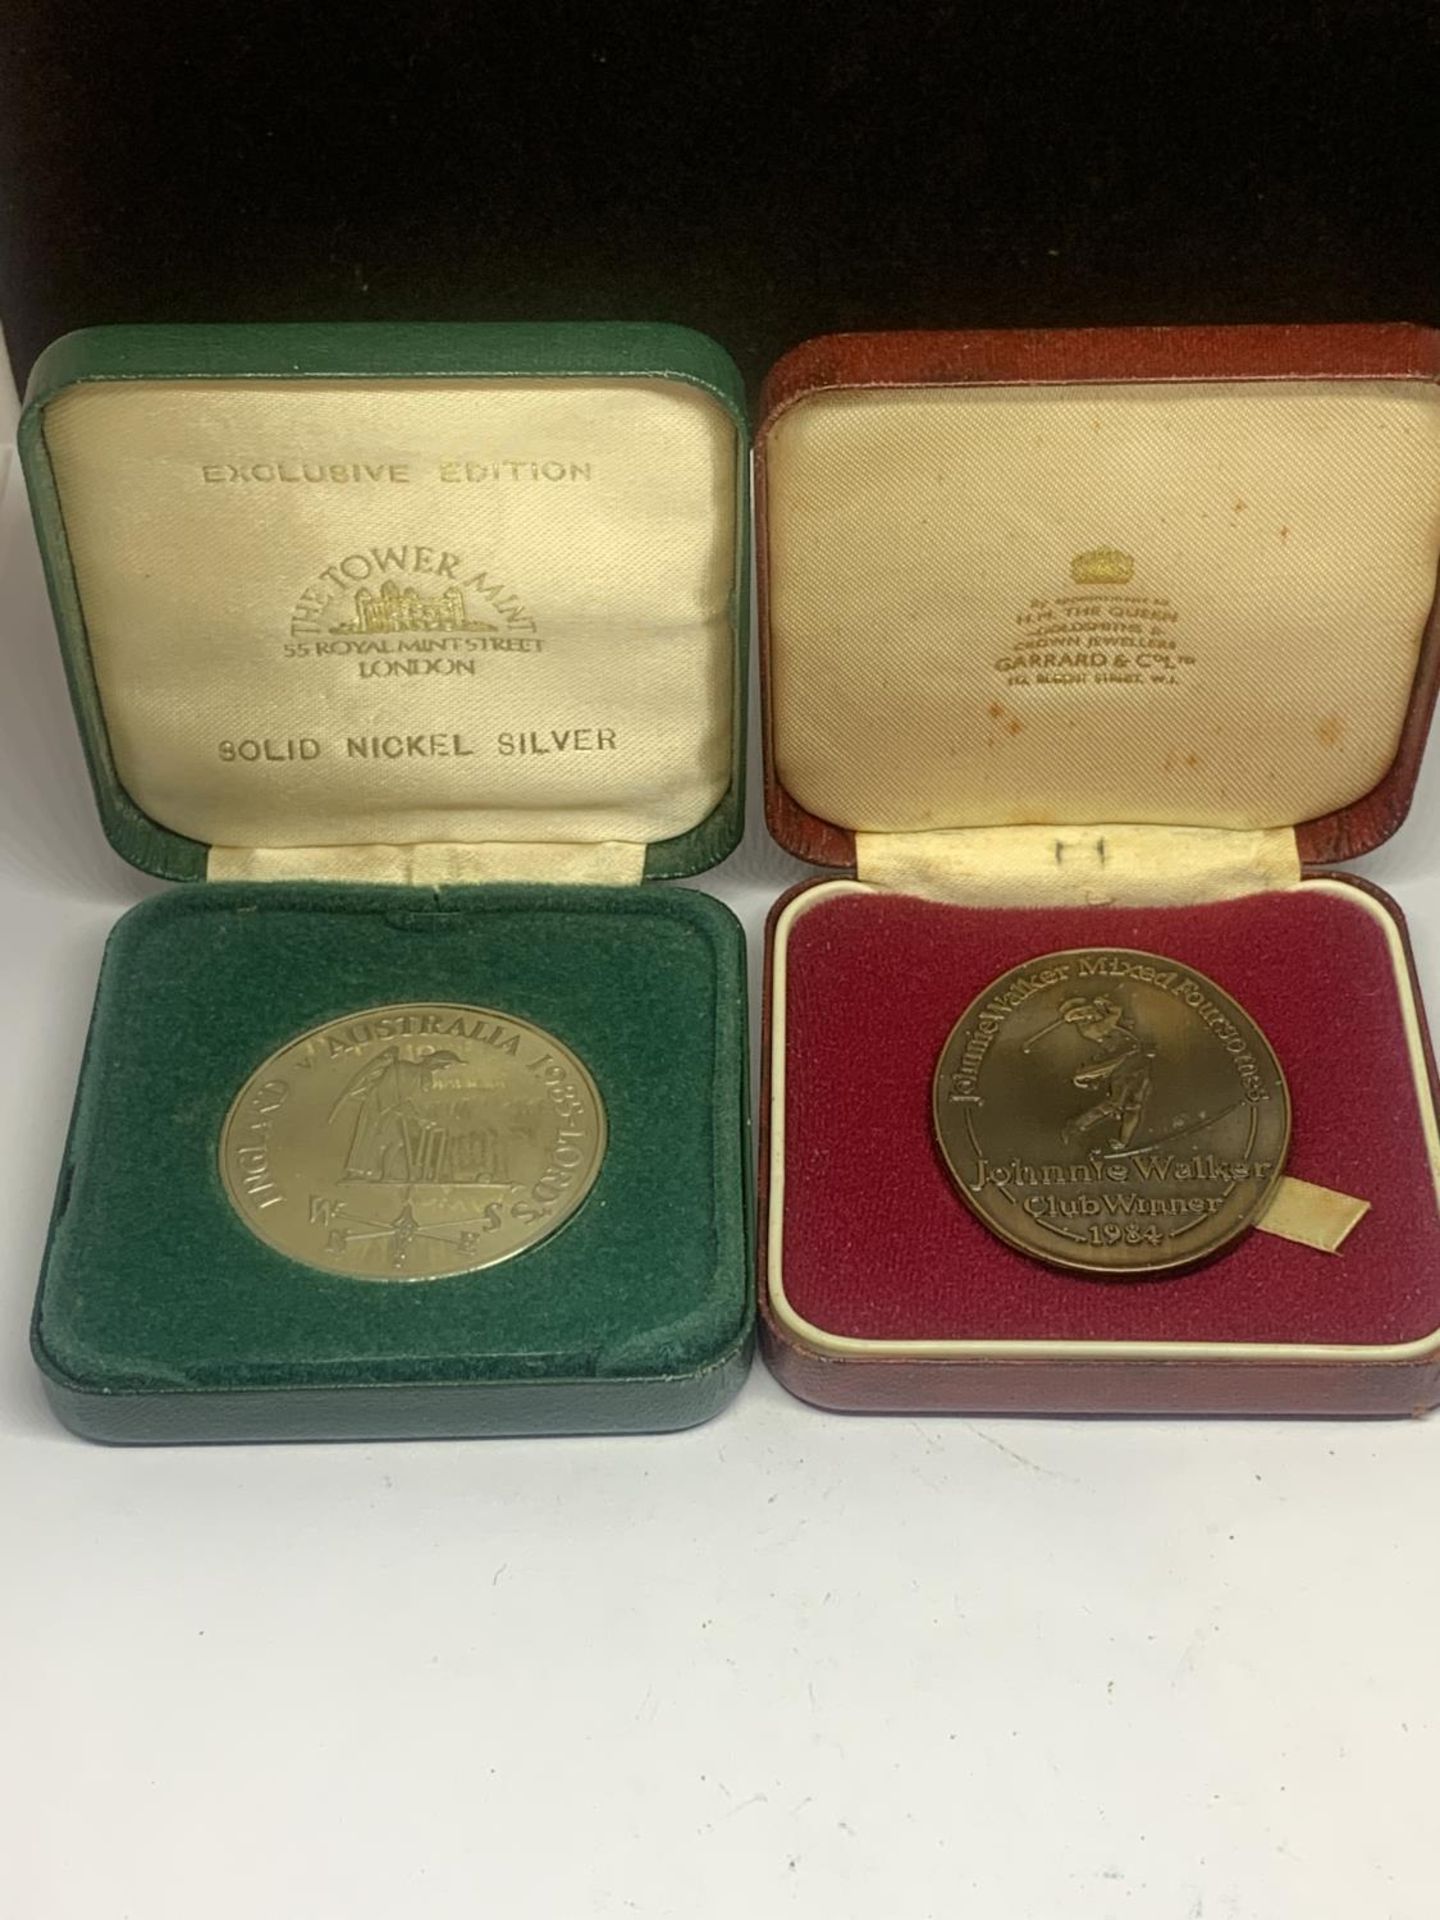 TWO BOXED MEDALS ONE LORDS 1985 AND ONE 1984 JOHNNIE WALKER CLUB WINNER